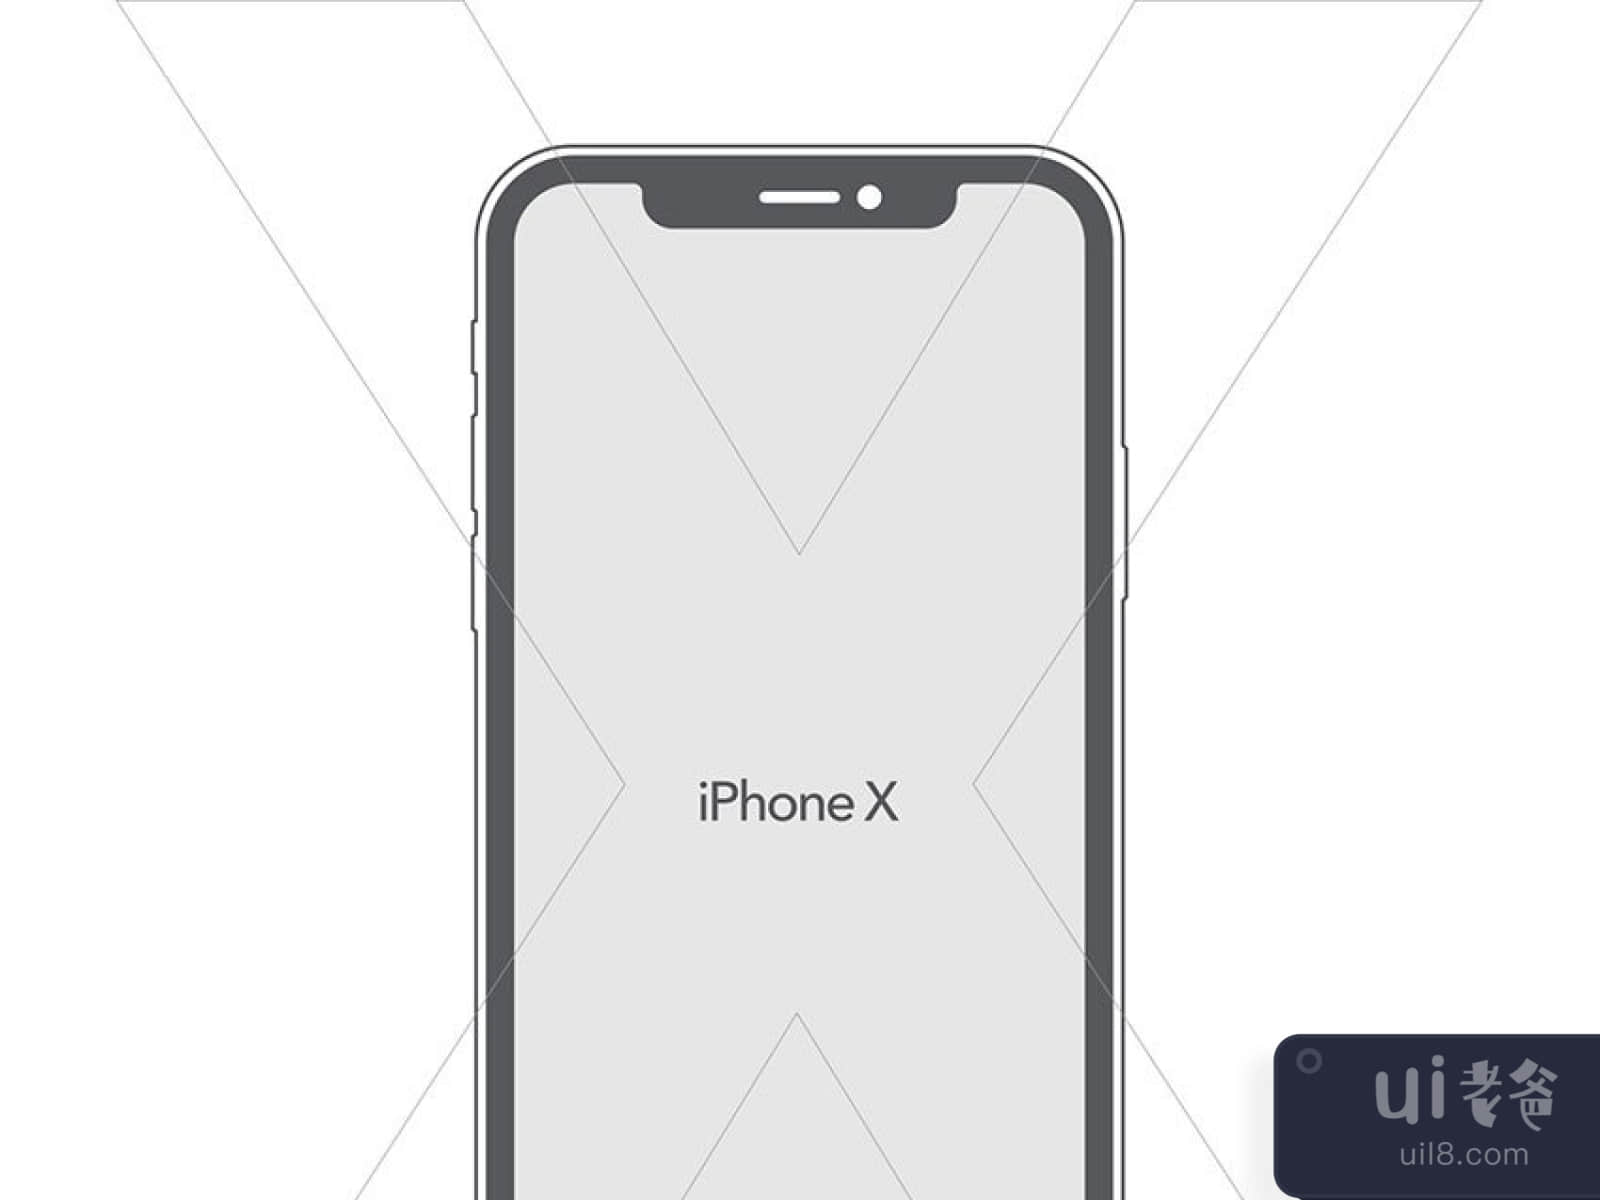 iPhone X Vector Mockup for Figma and Adobe XD No 1